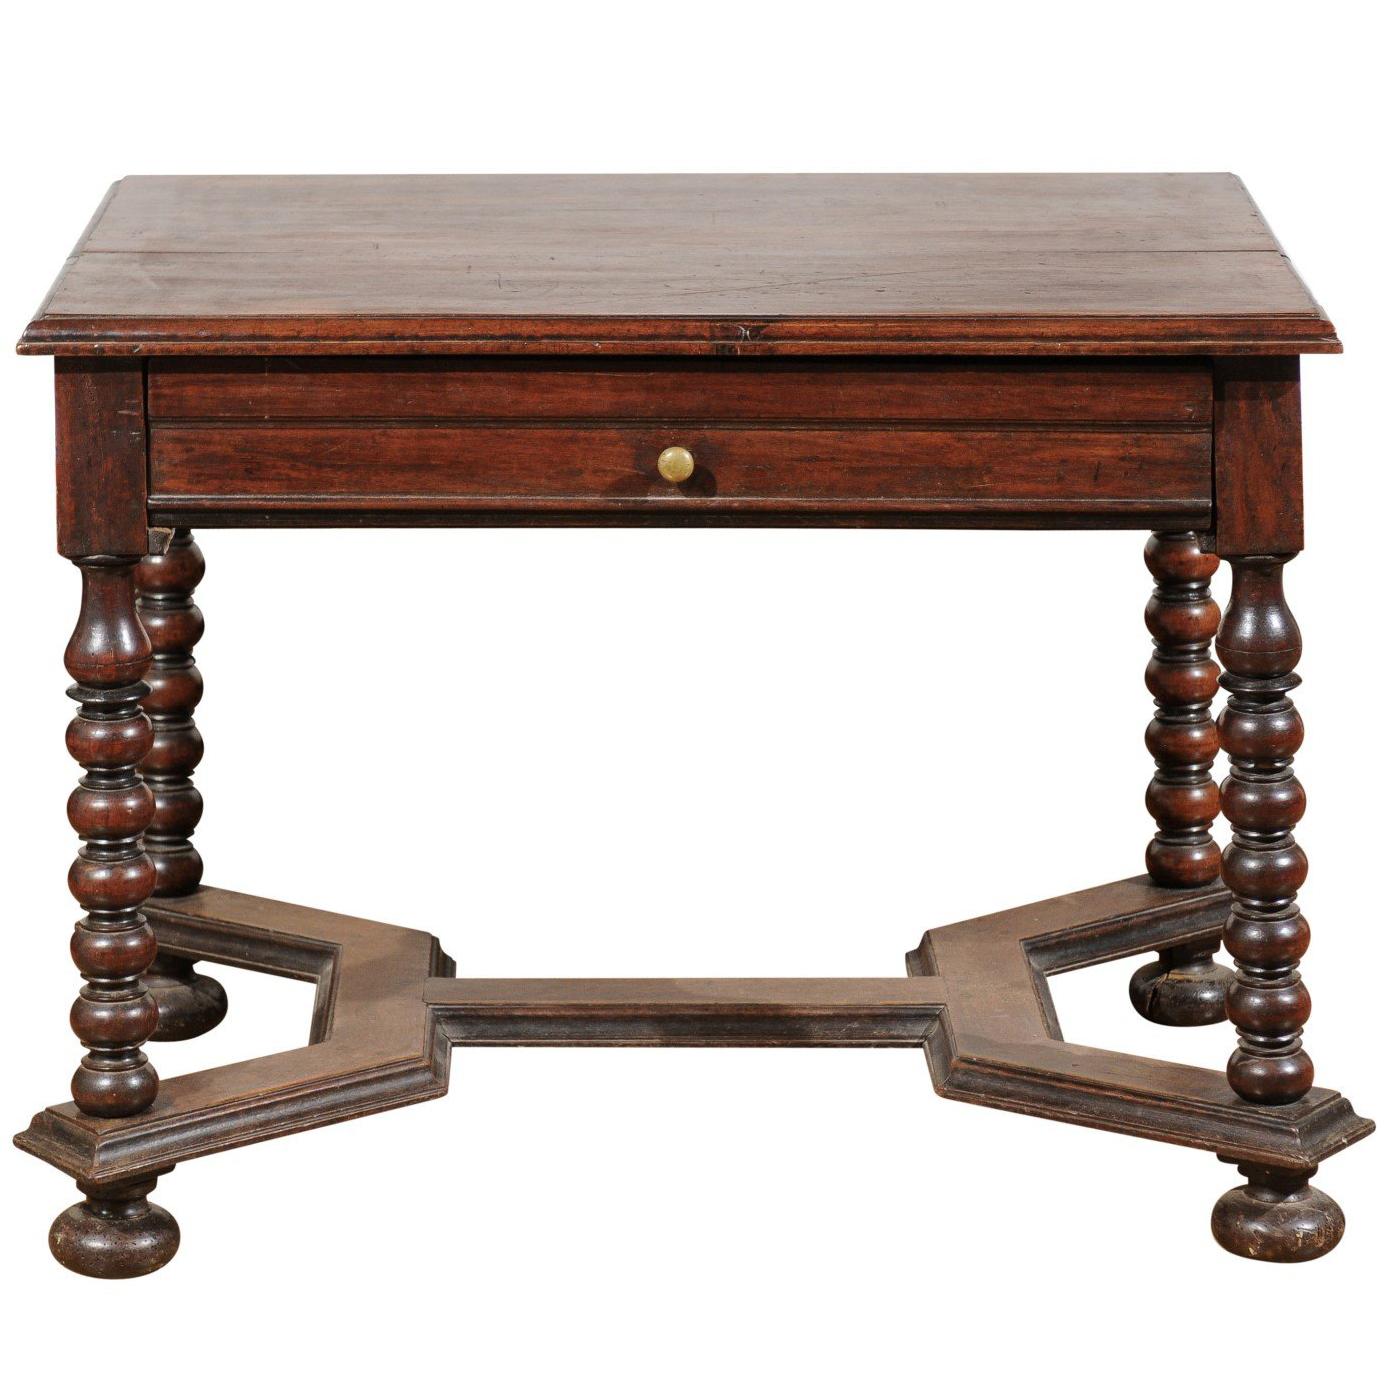 French 17th Century Louis XIII Walnut Side Table with Bobbin Legs and Stretcher For Sale